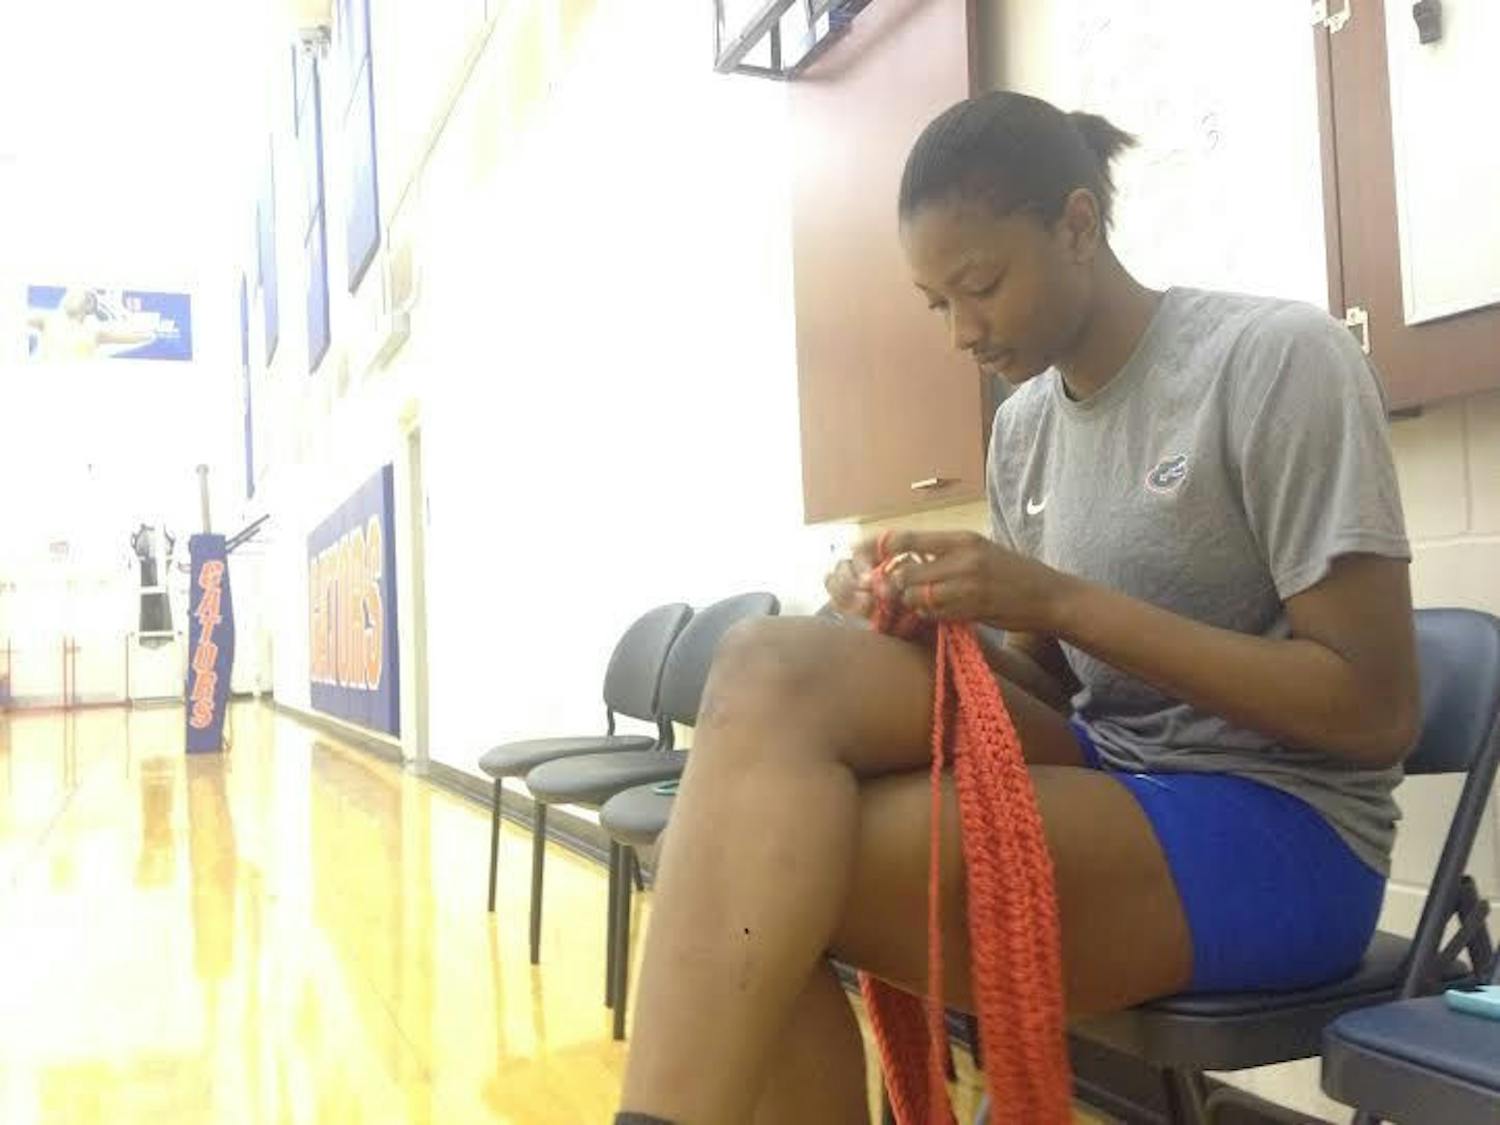 UF middle blocker Rhamat Alhassan knits before practice on Oct. 21, 2015,&nbsp;in the Lemerand Practice Facility.